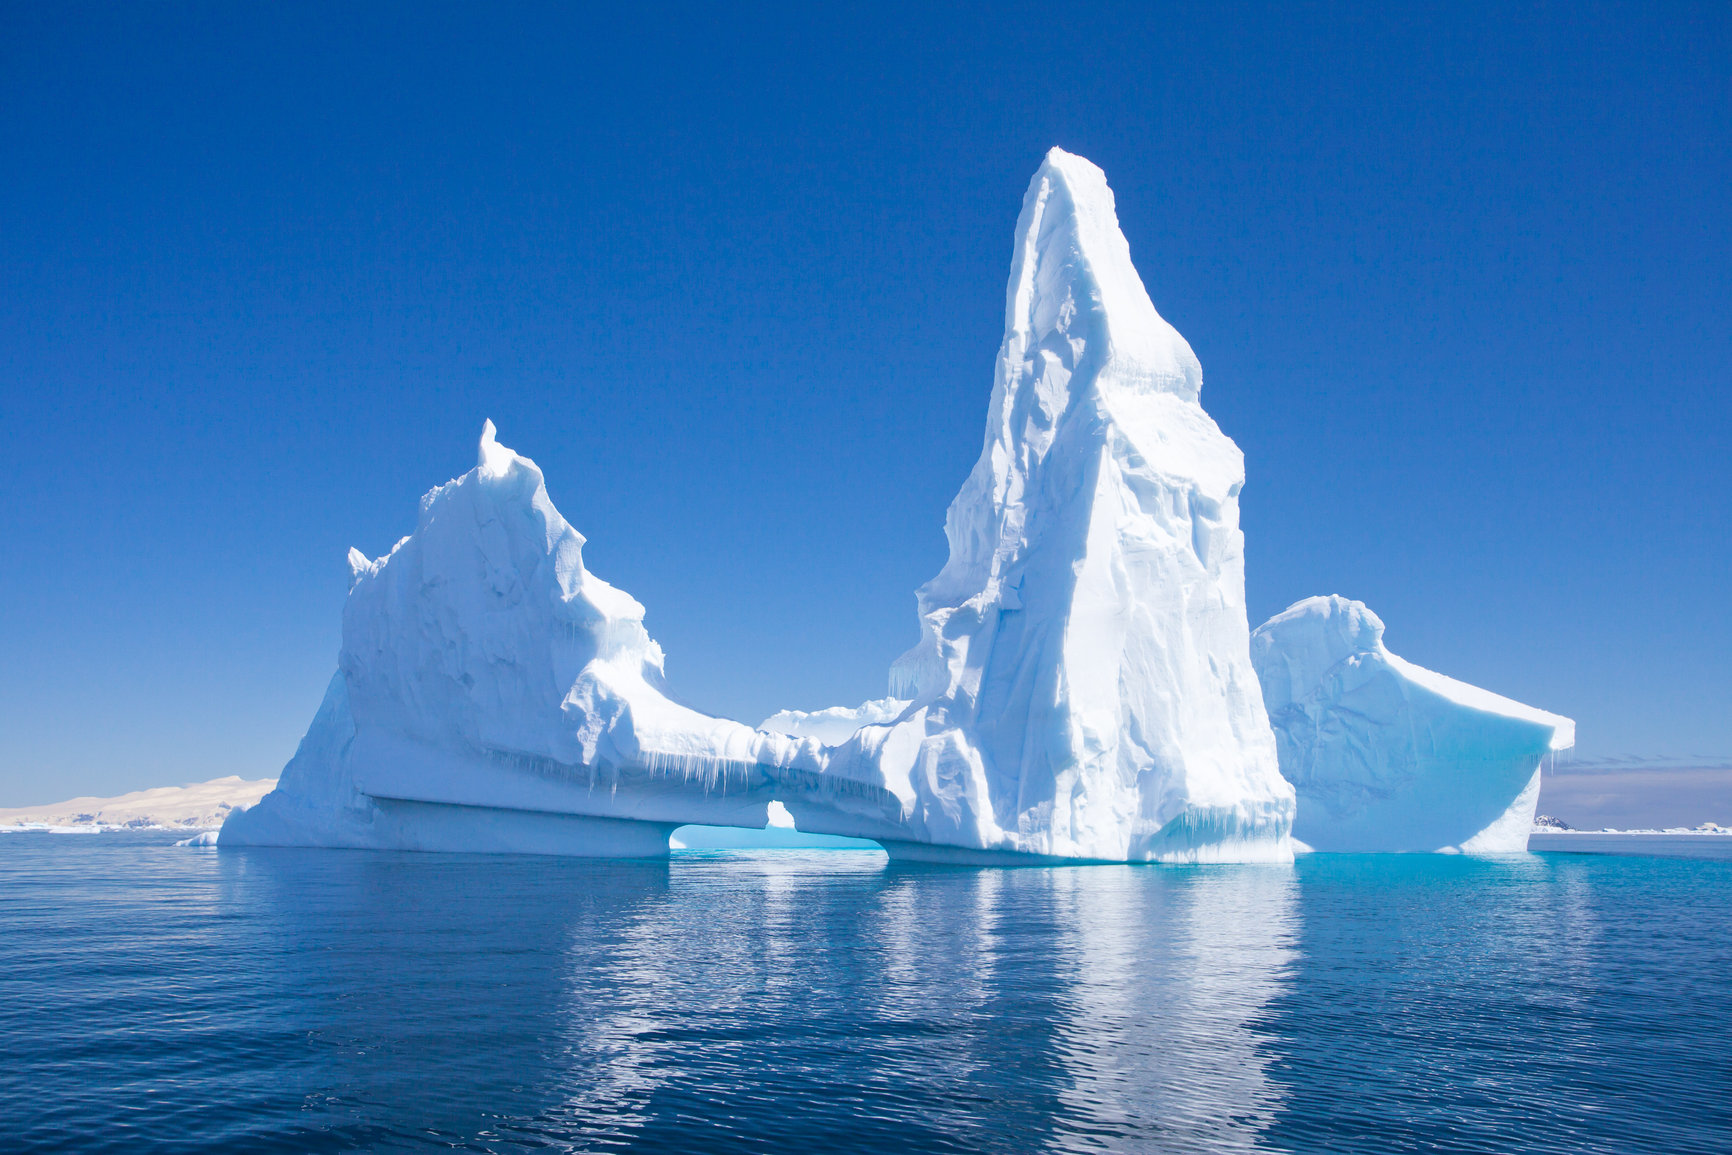 The Iceberg is moving: The use of IT in Scottish Litigation - Gilson Gray